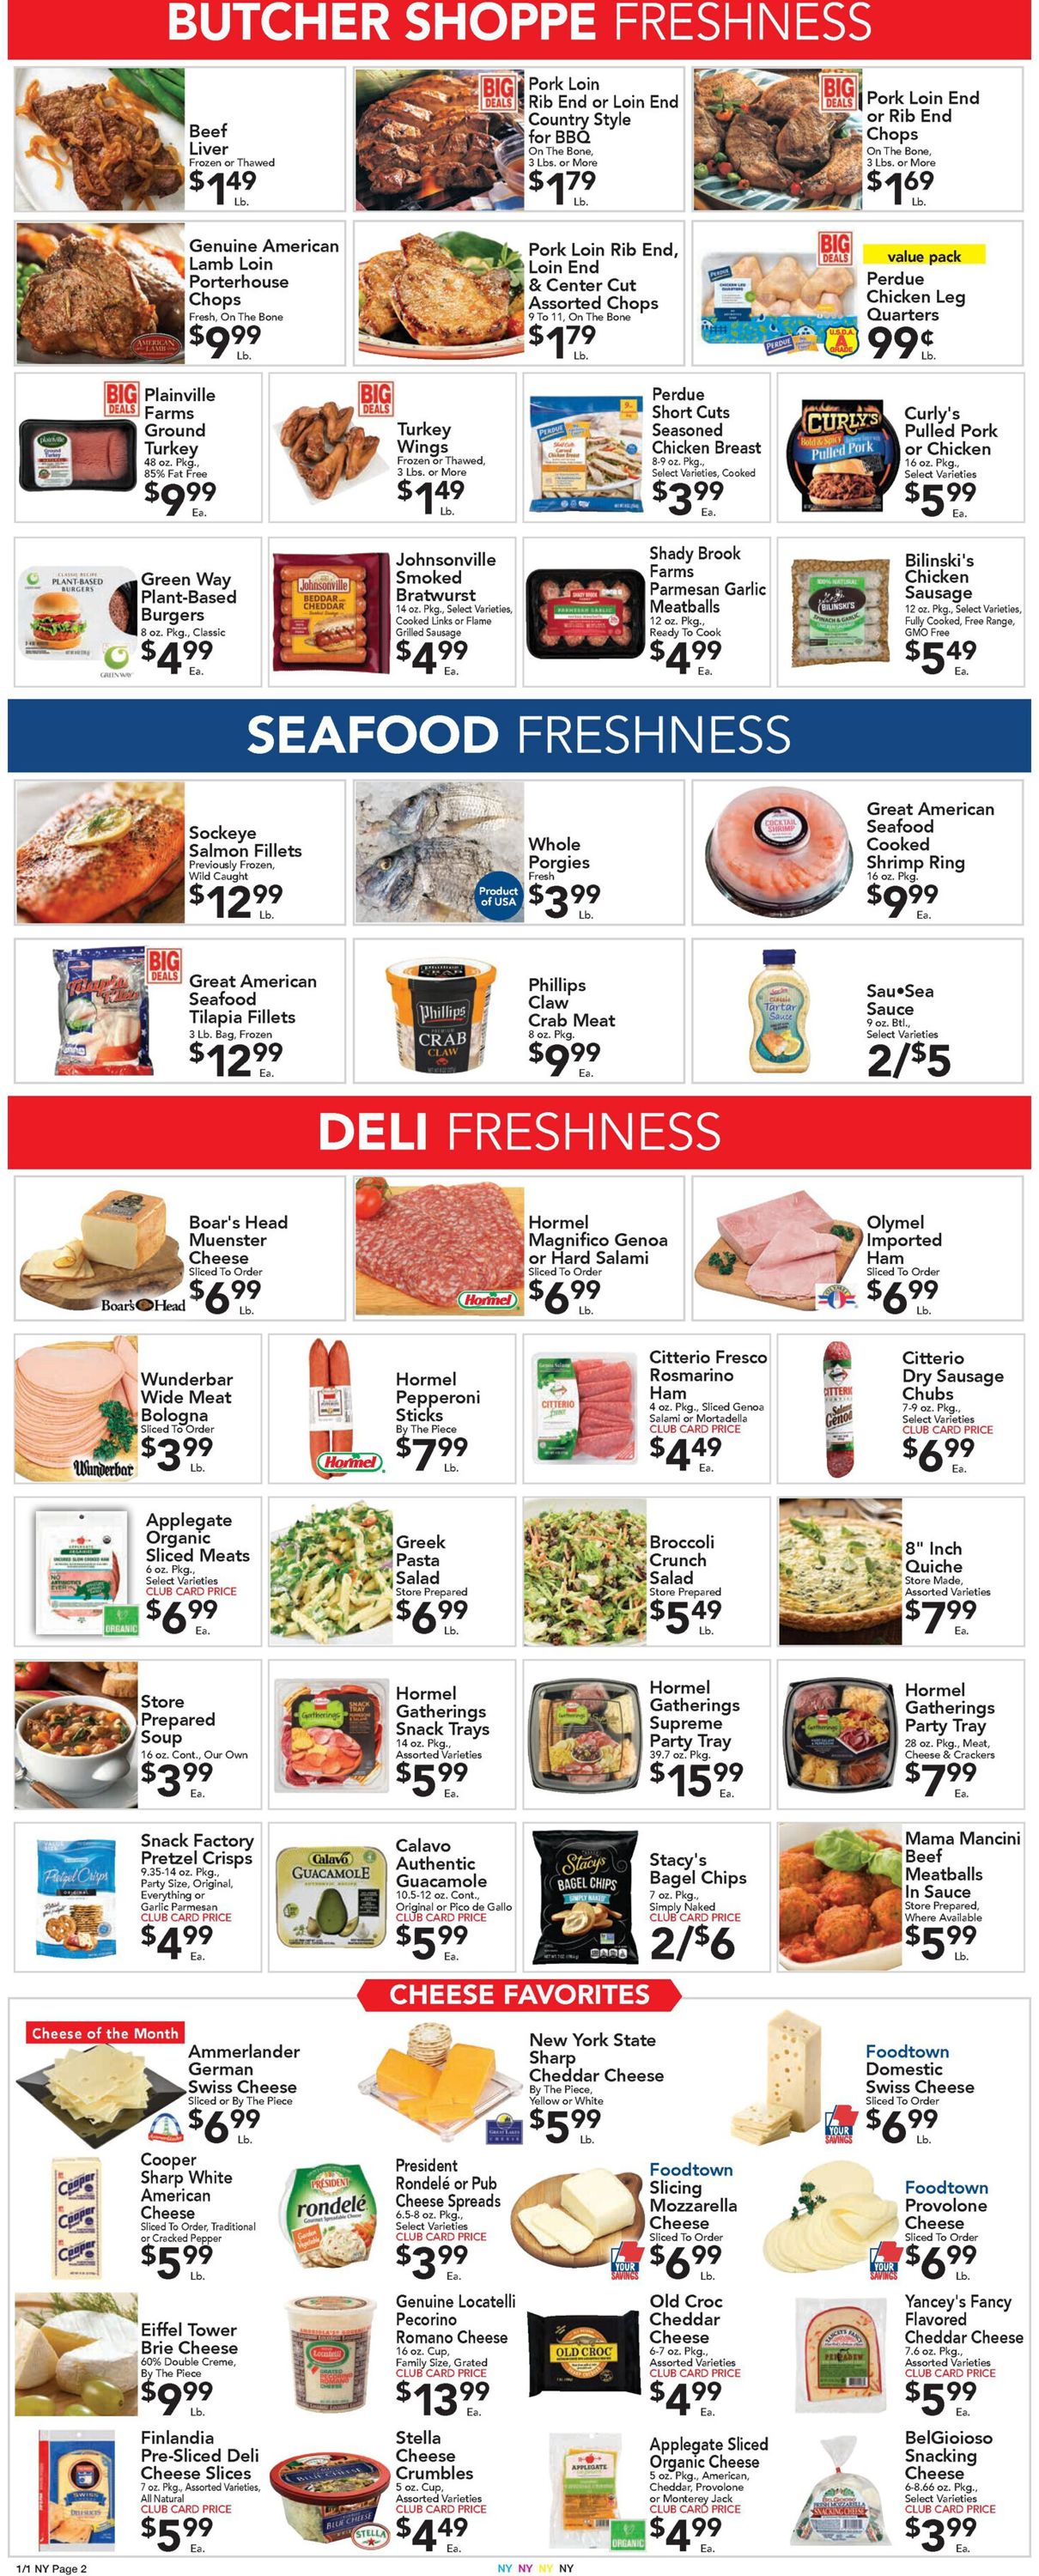 Catalogue Foodtown from 01/01/2021